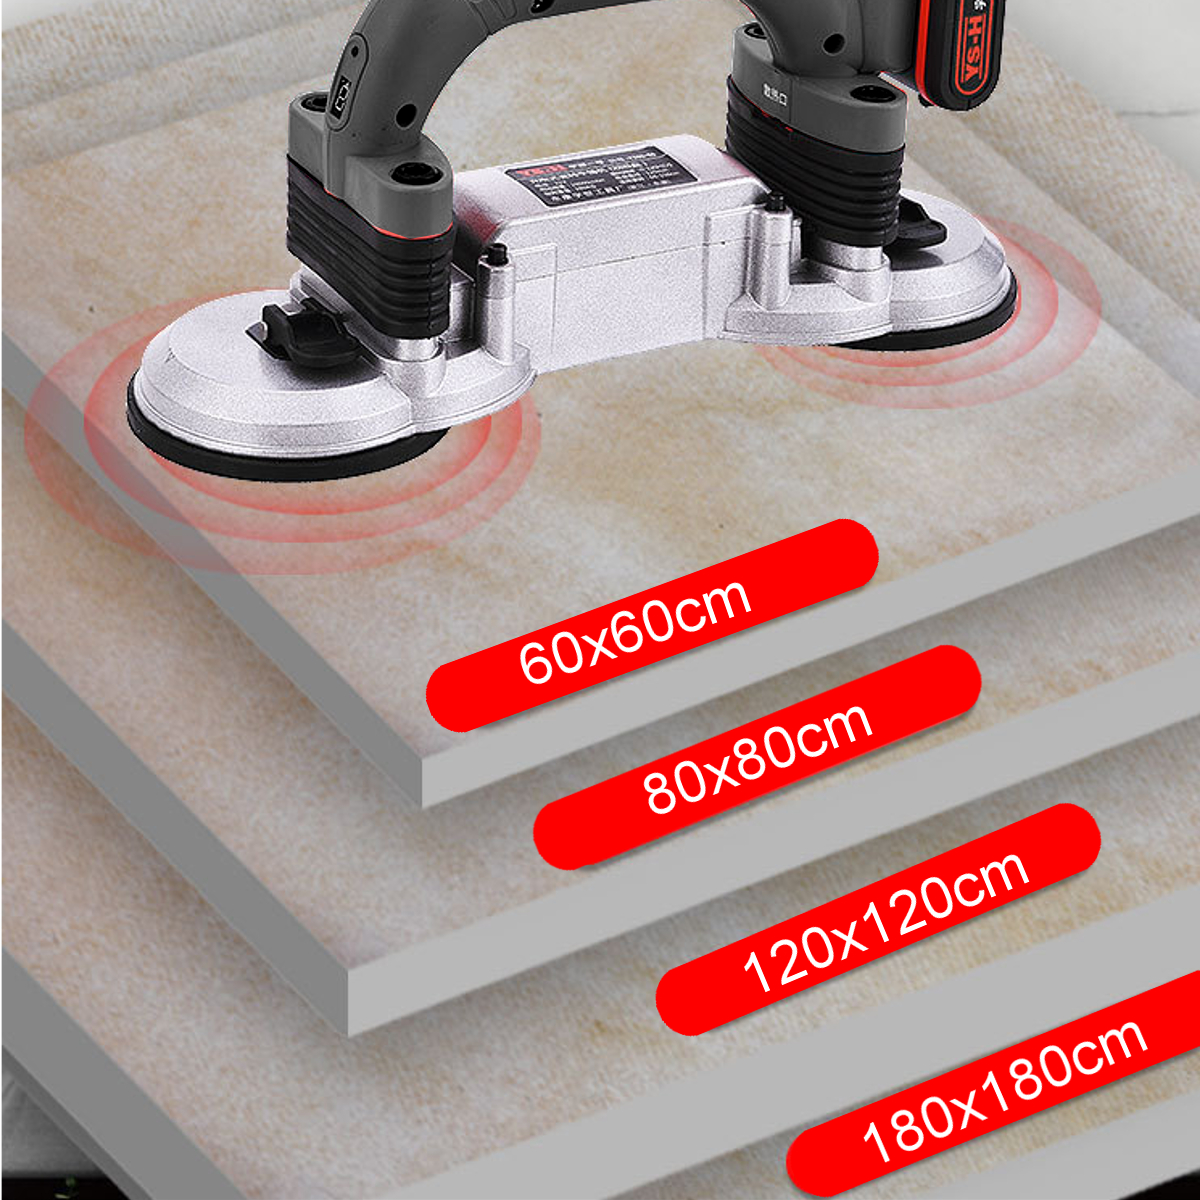 6-Speed-Tile-Tiling-Machine-Vibrator-Suction-Floor-Plaster-Laying-With-BatteryCase-1754739-4